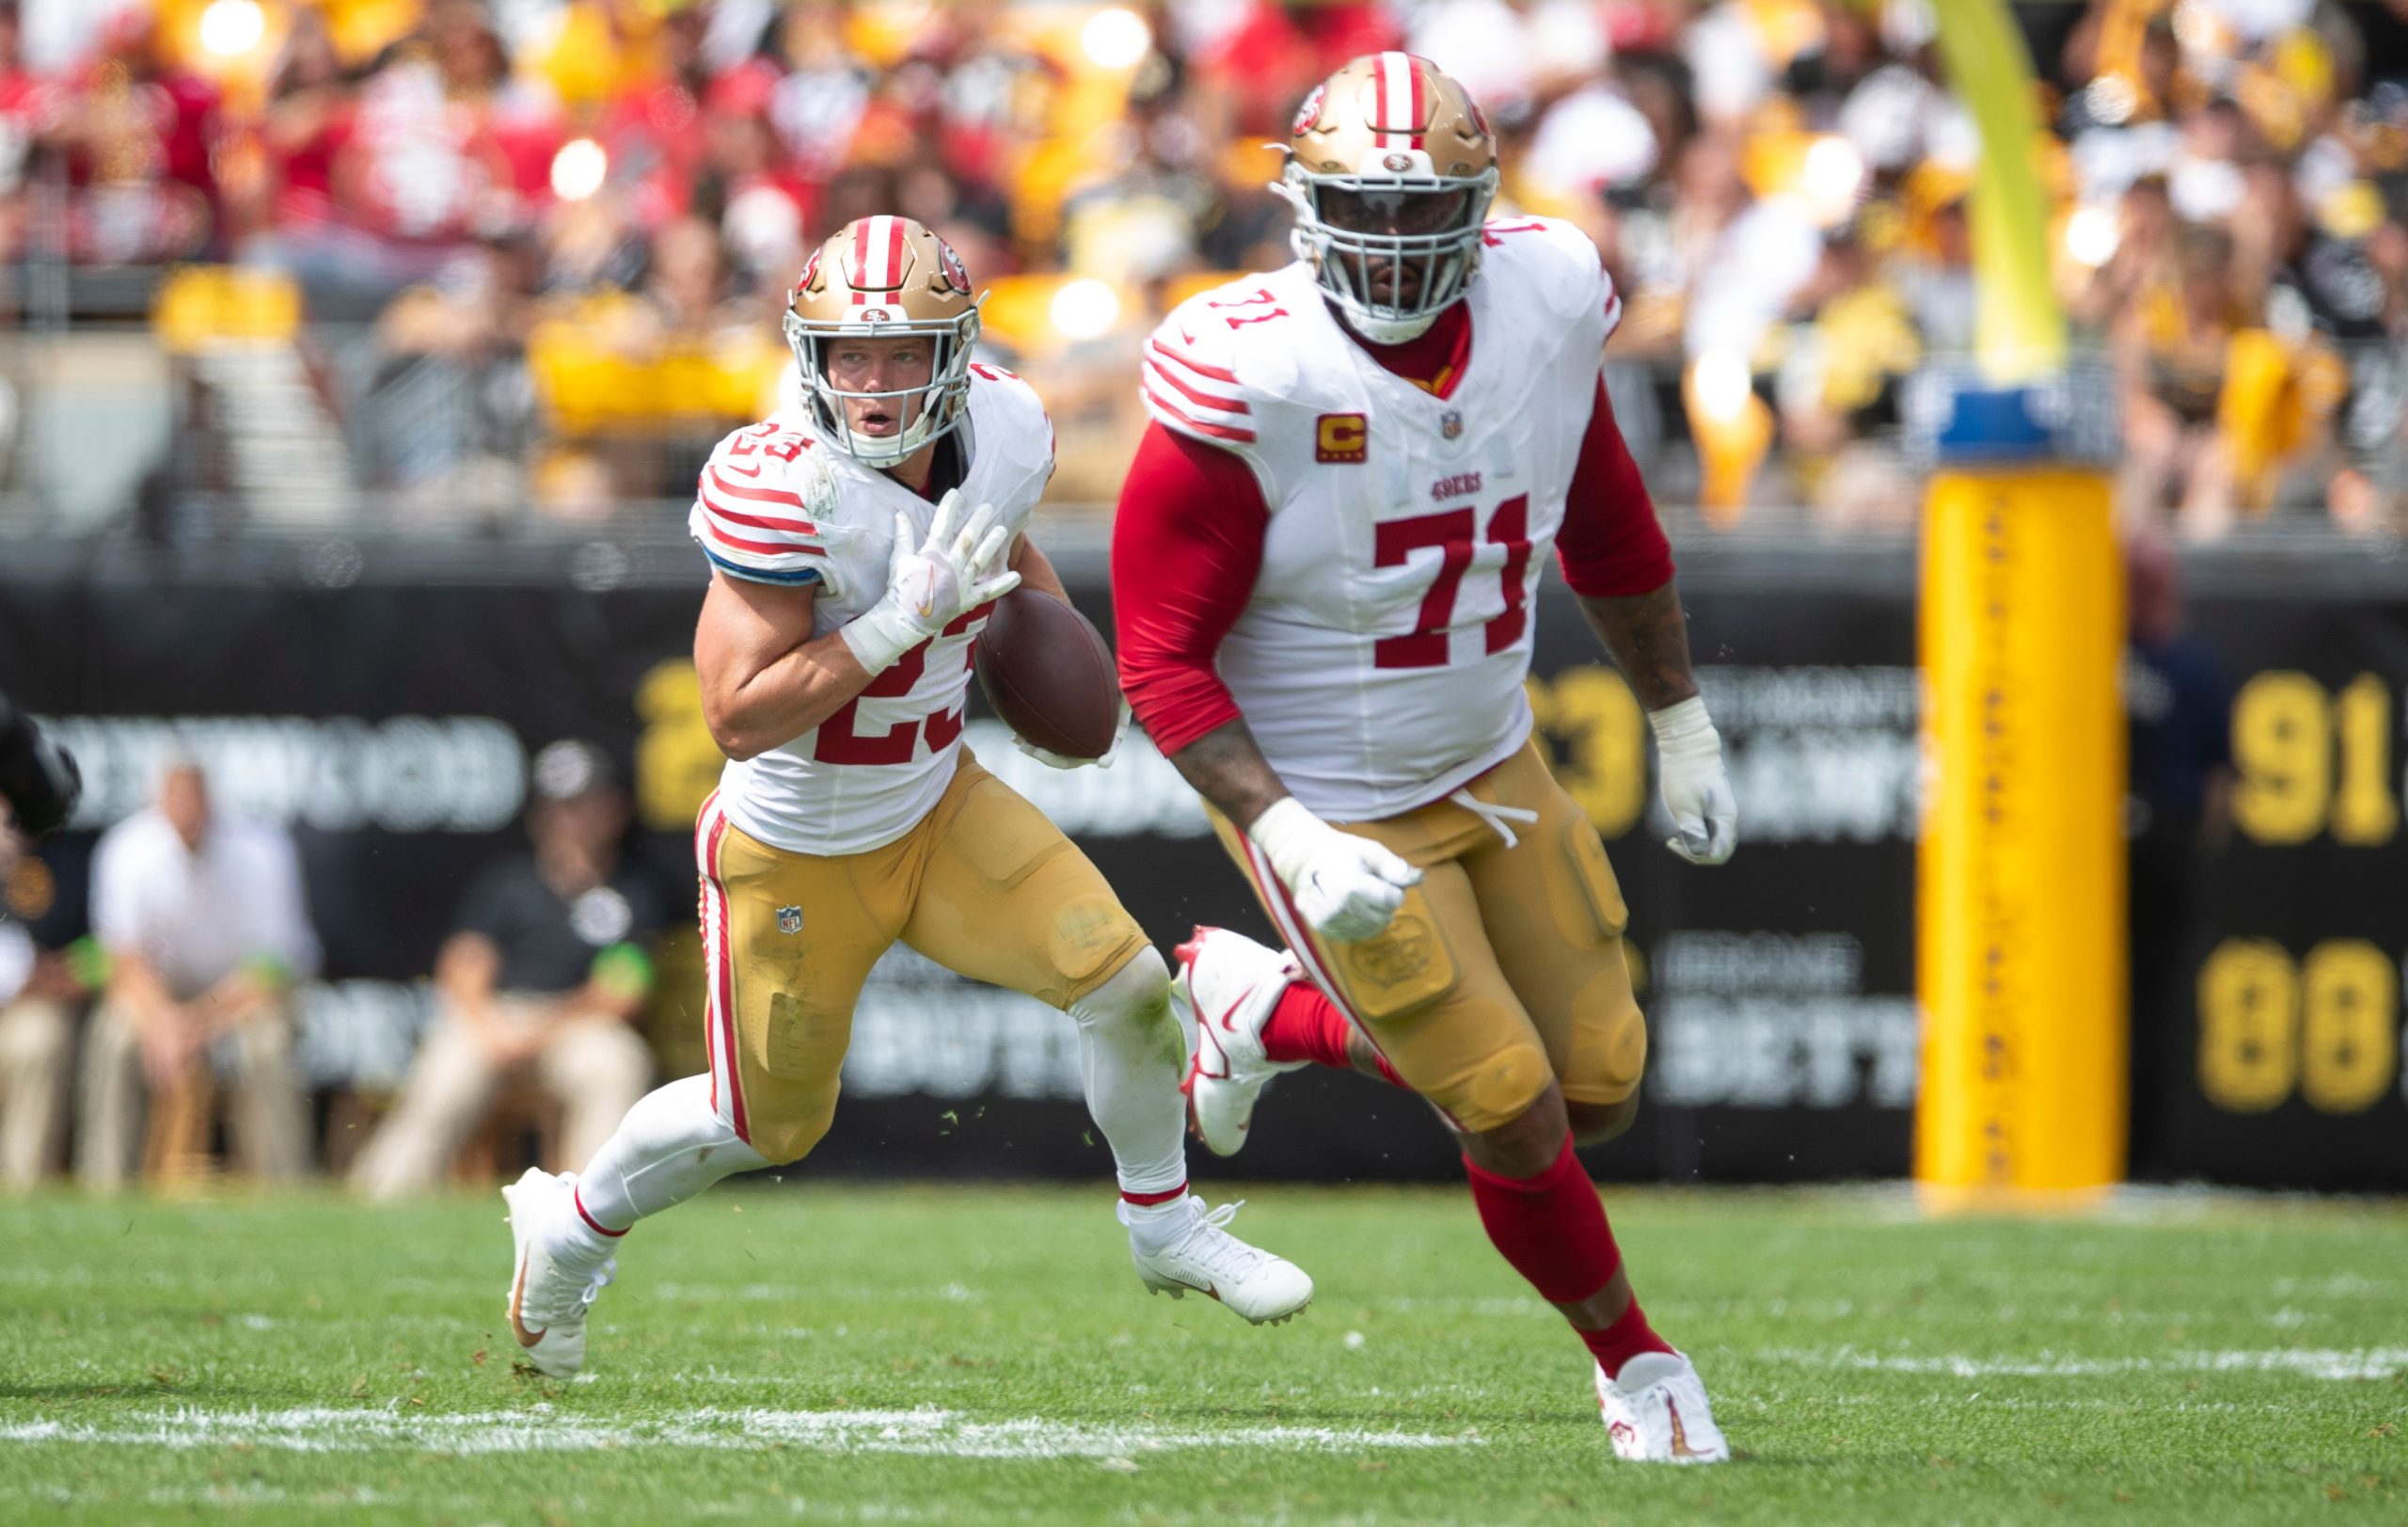 Christian McCaffrey #23 of the San Francisco 49ers rushes as Trent Williams #71 blocks during the g...